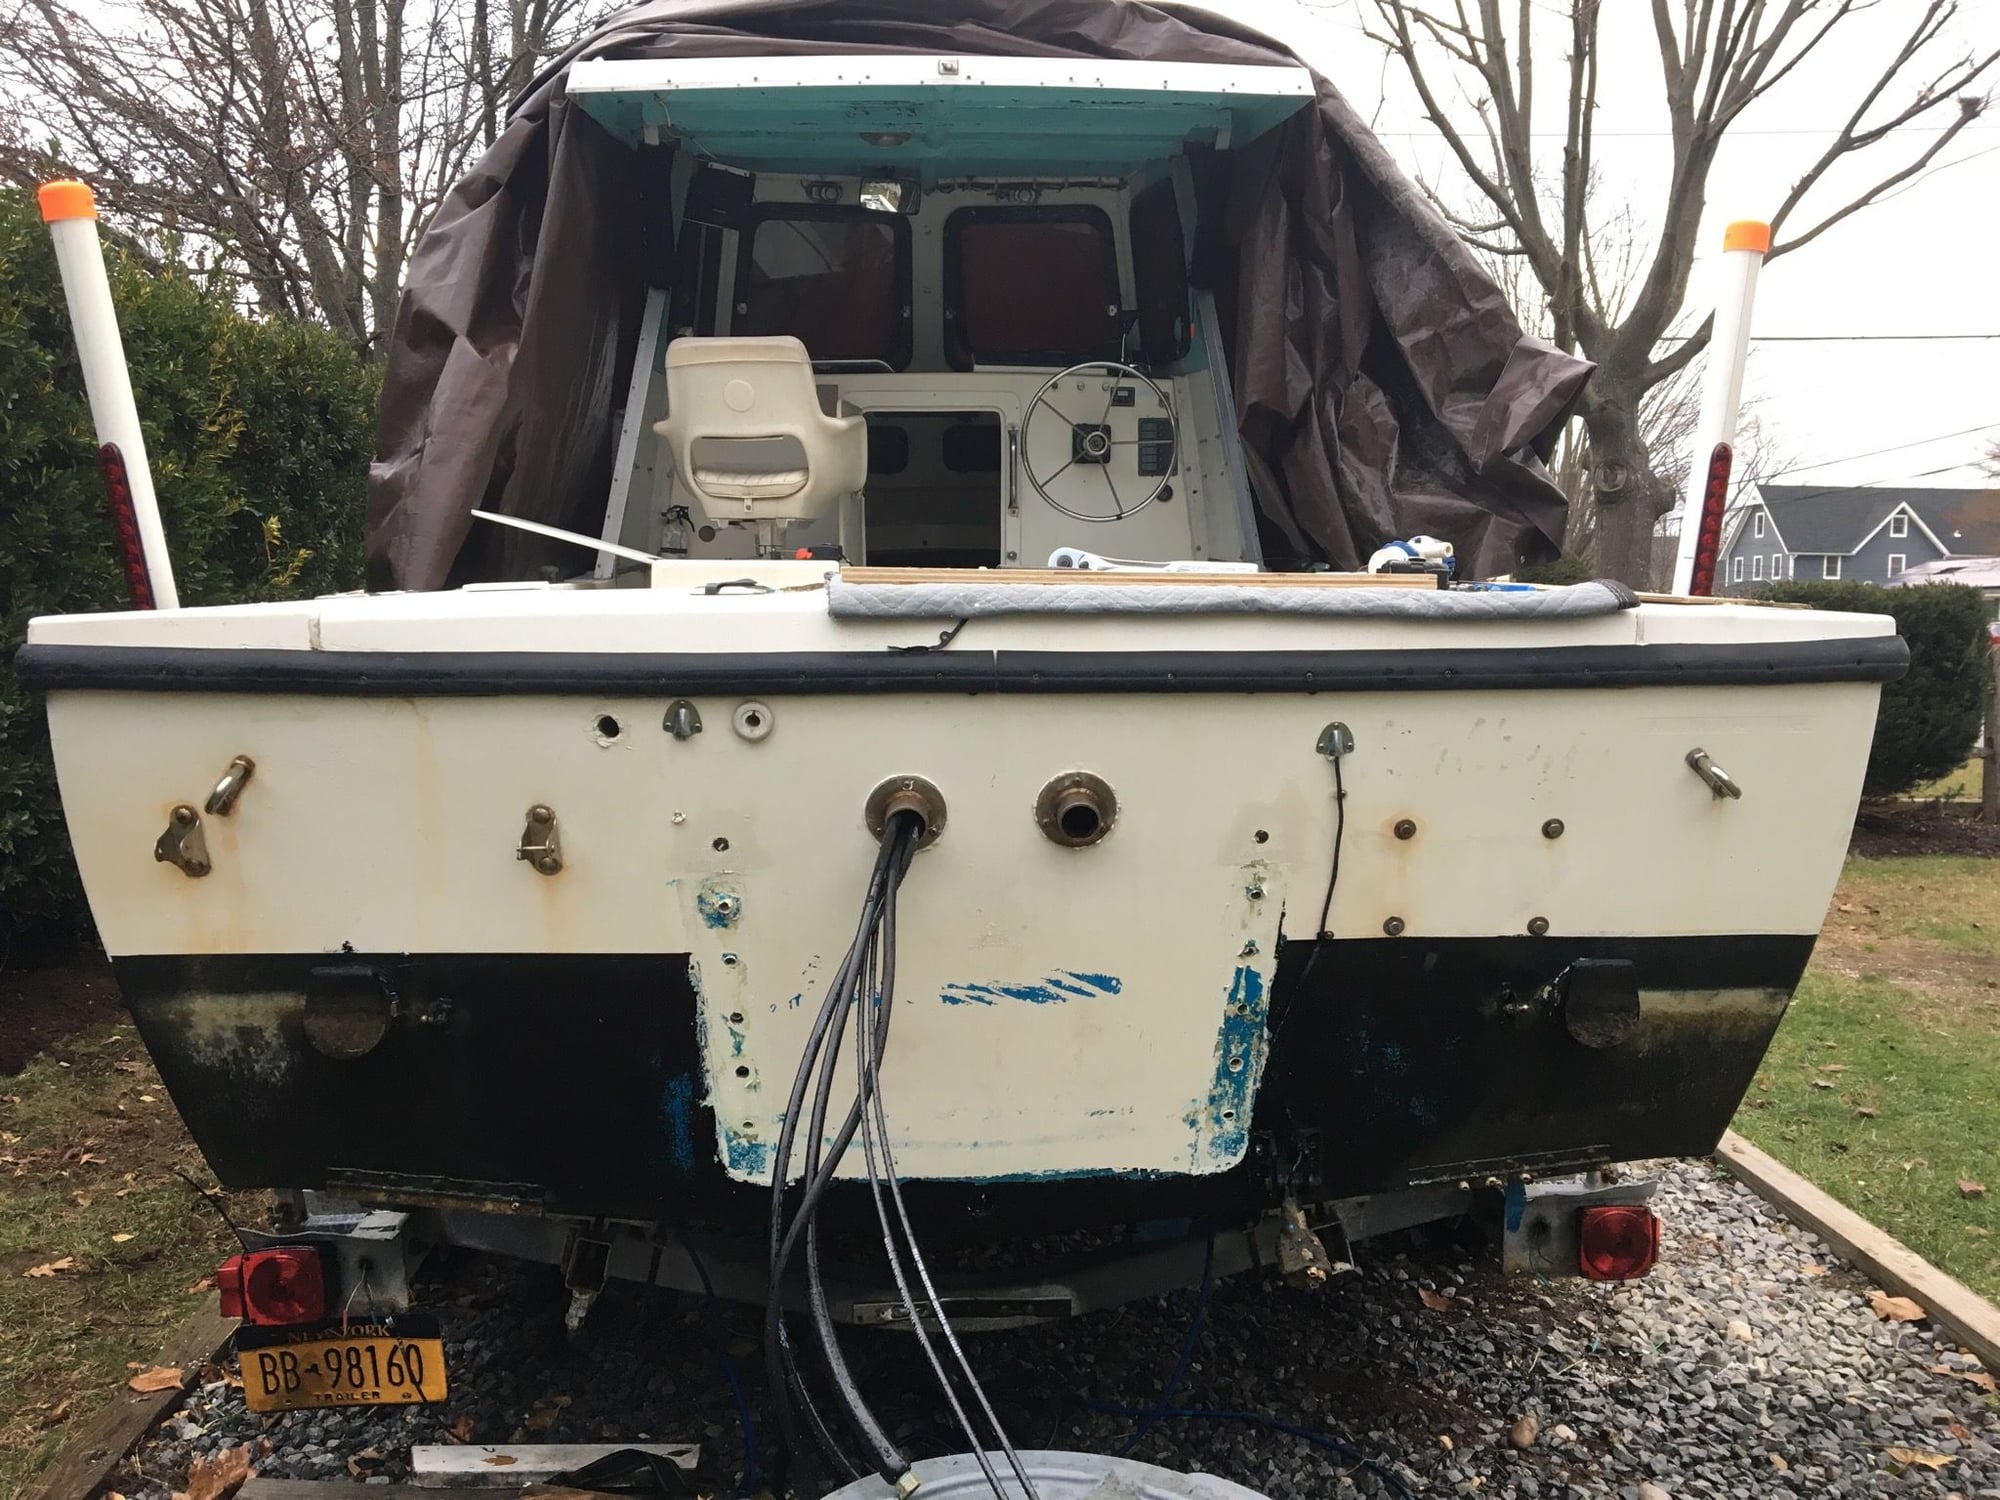 Transducer too close to tabs? - The Hull Truth - Boating and Fishing Forum